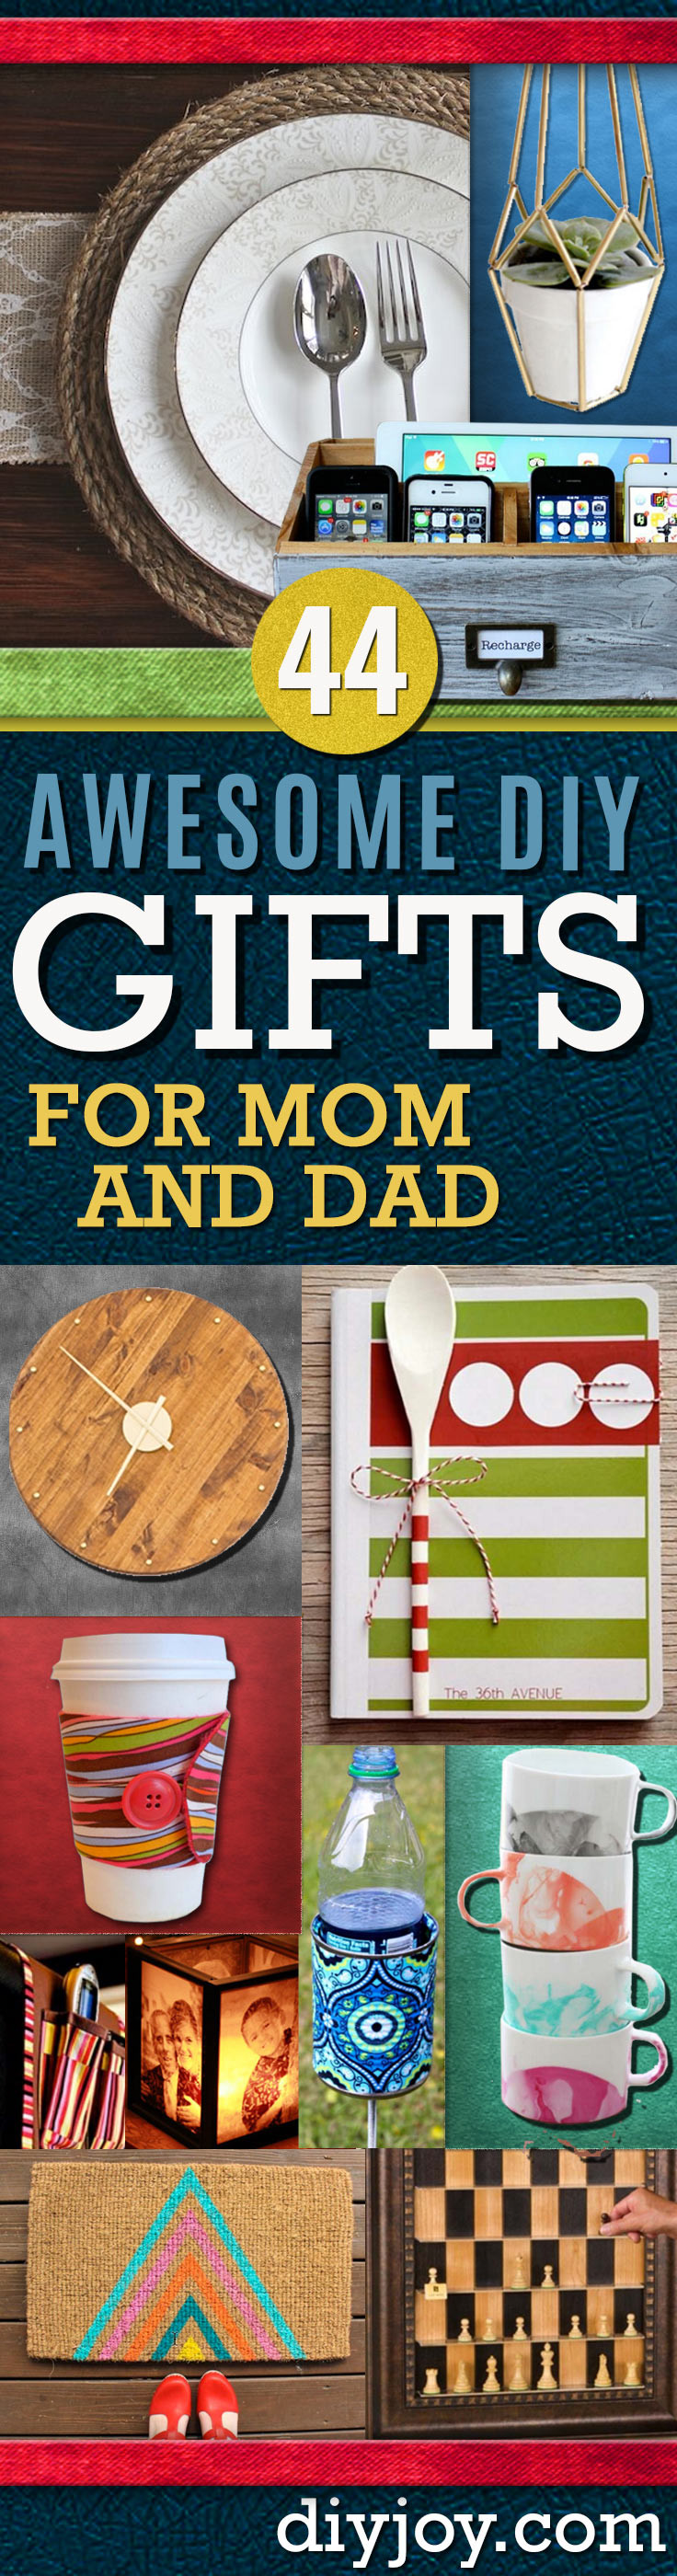 Christmas Gift Ideas For Mother
 Awesome DIY Gift Ideas Mom and Dad Will Love